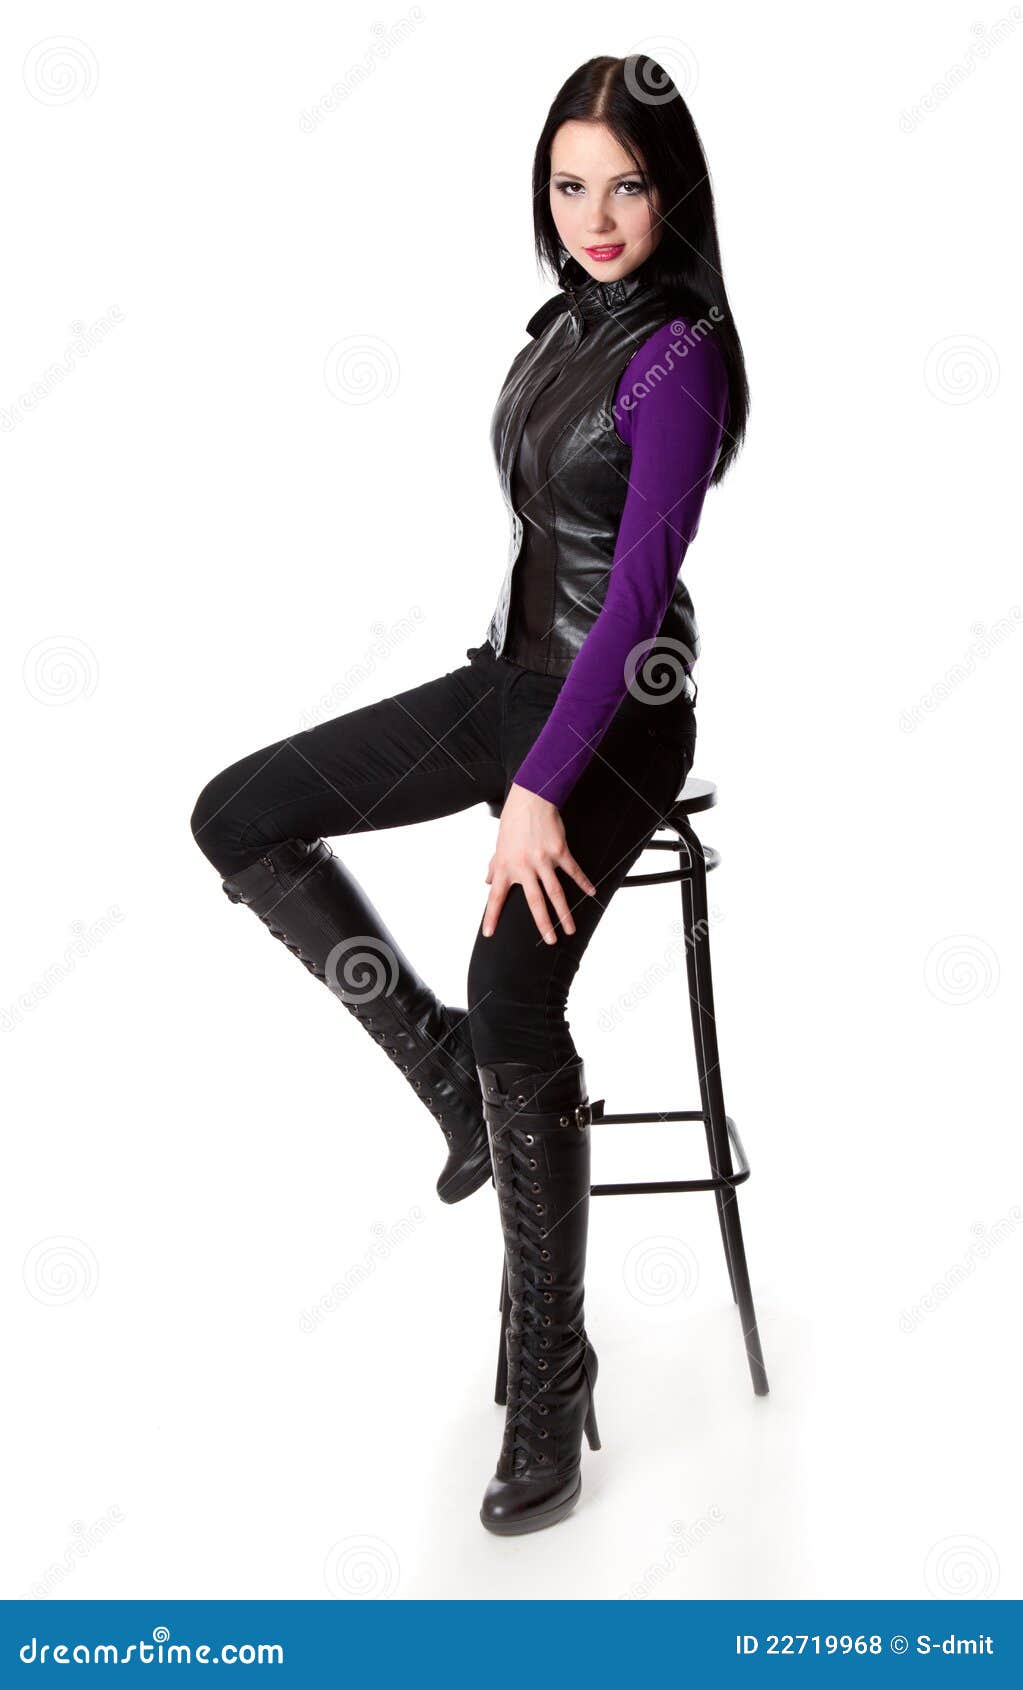 glamourous woman is sitting on a chair